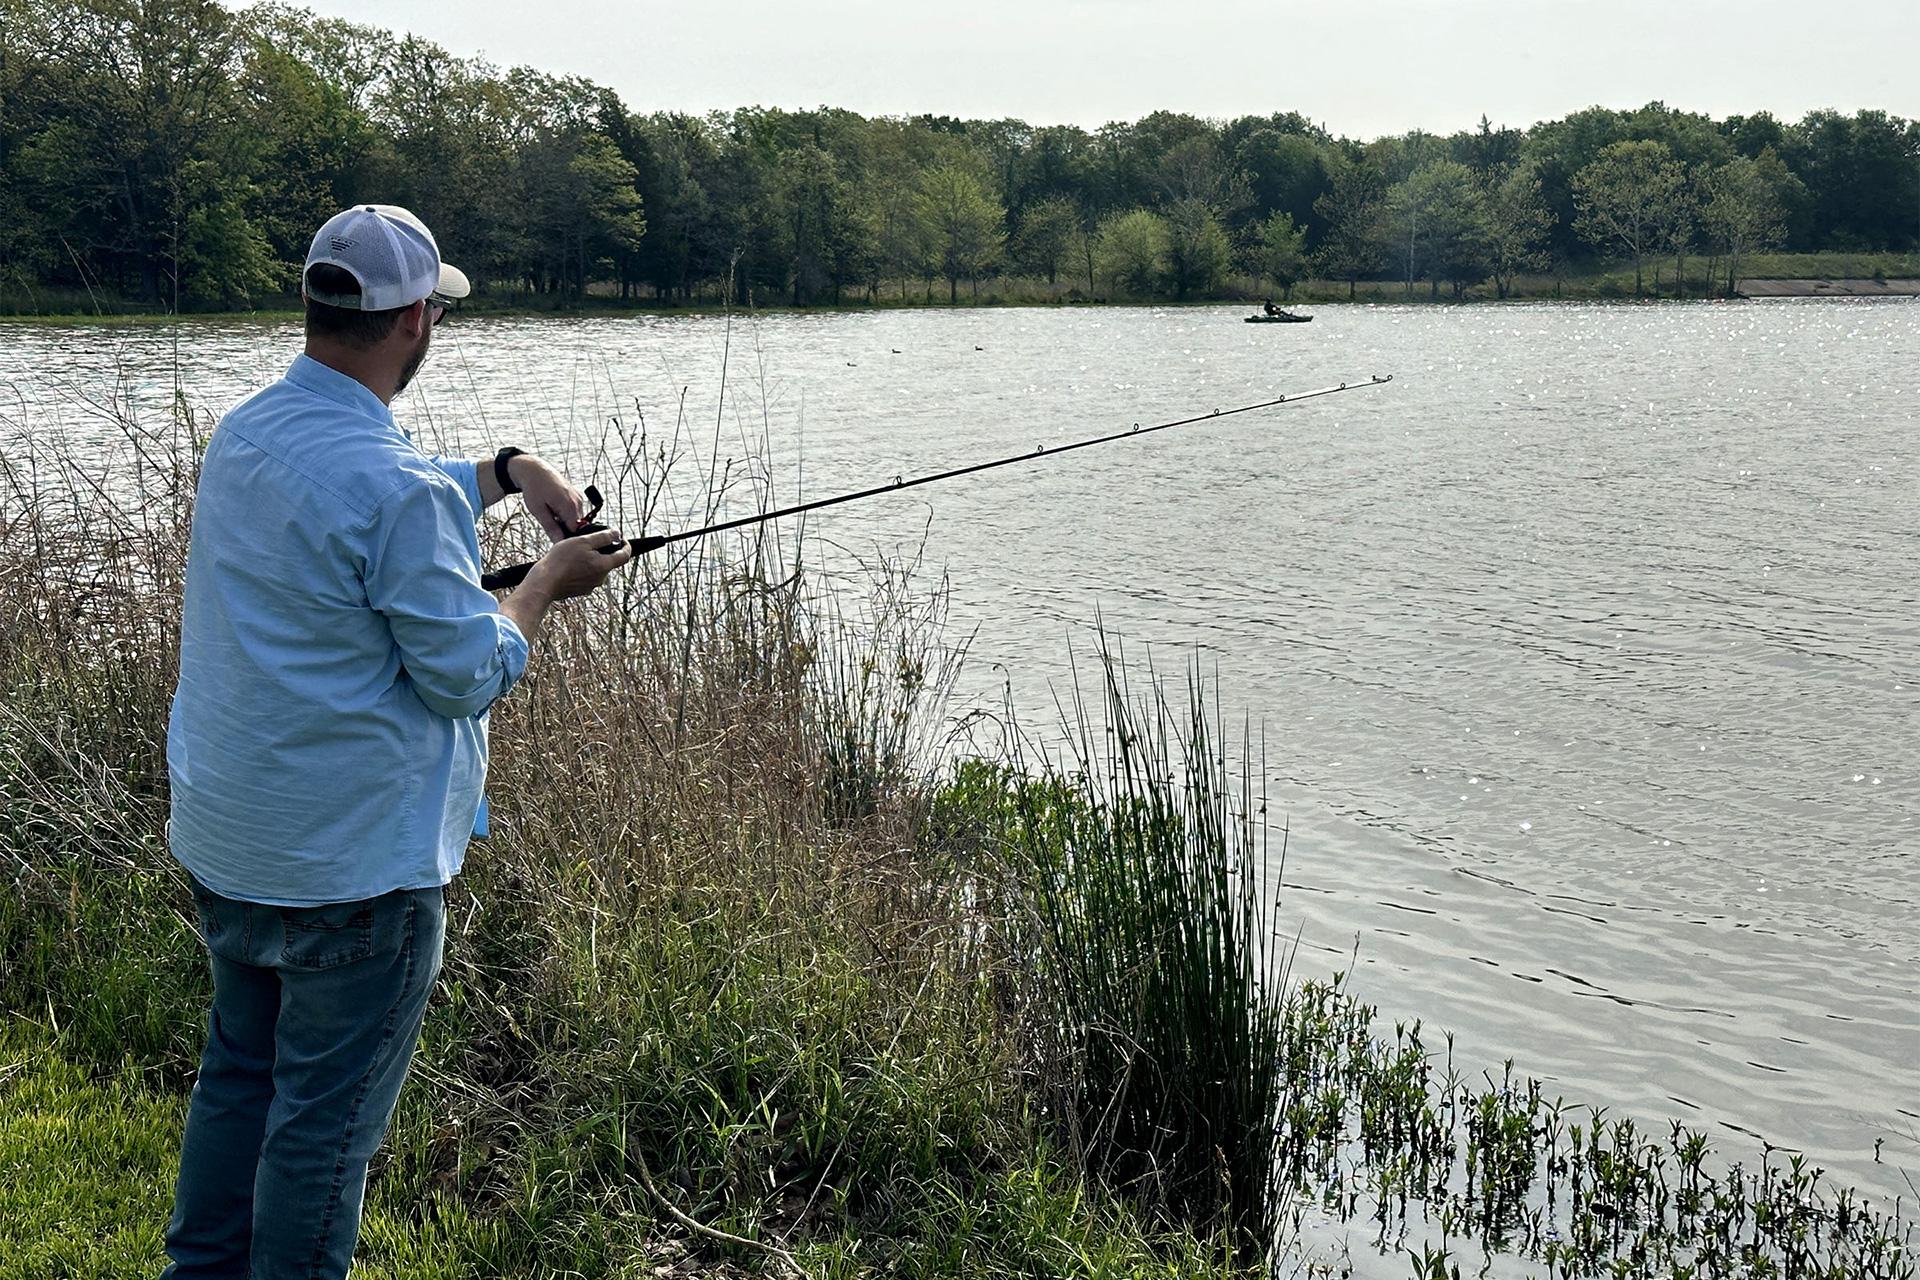 A person fishing on a lake from the banks of a lake.